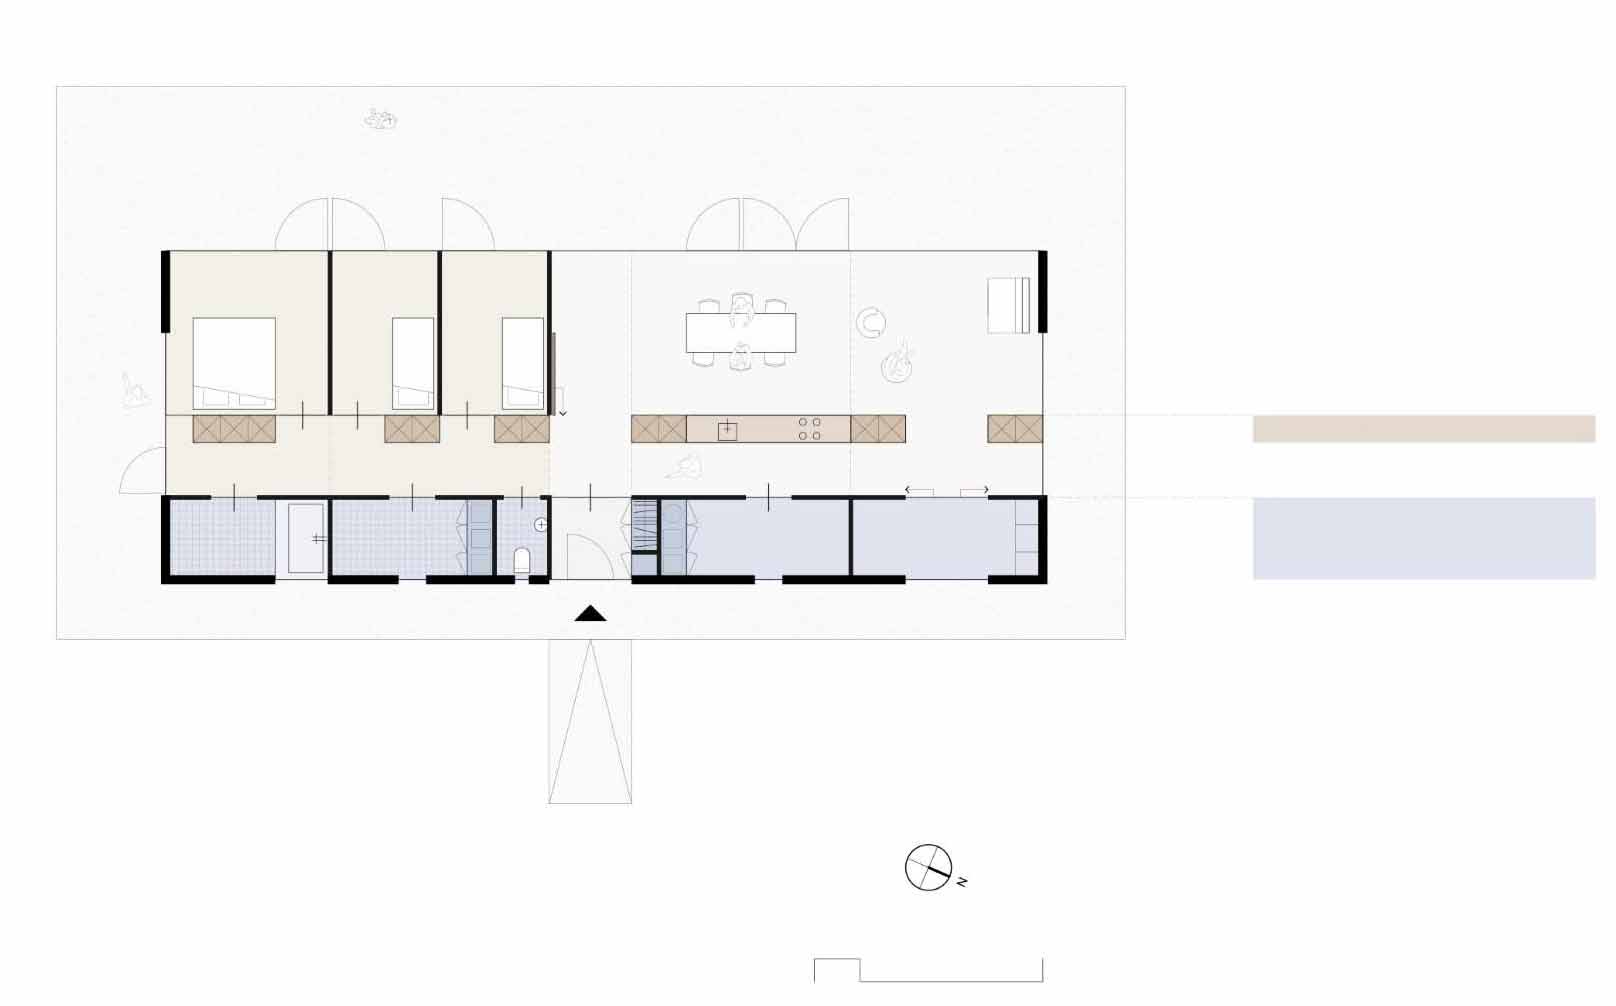 The floor plan for a modern home.